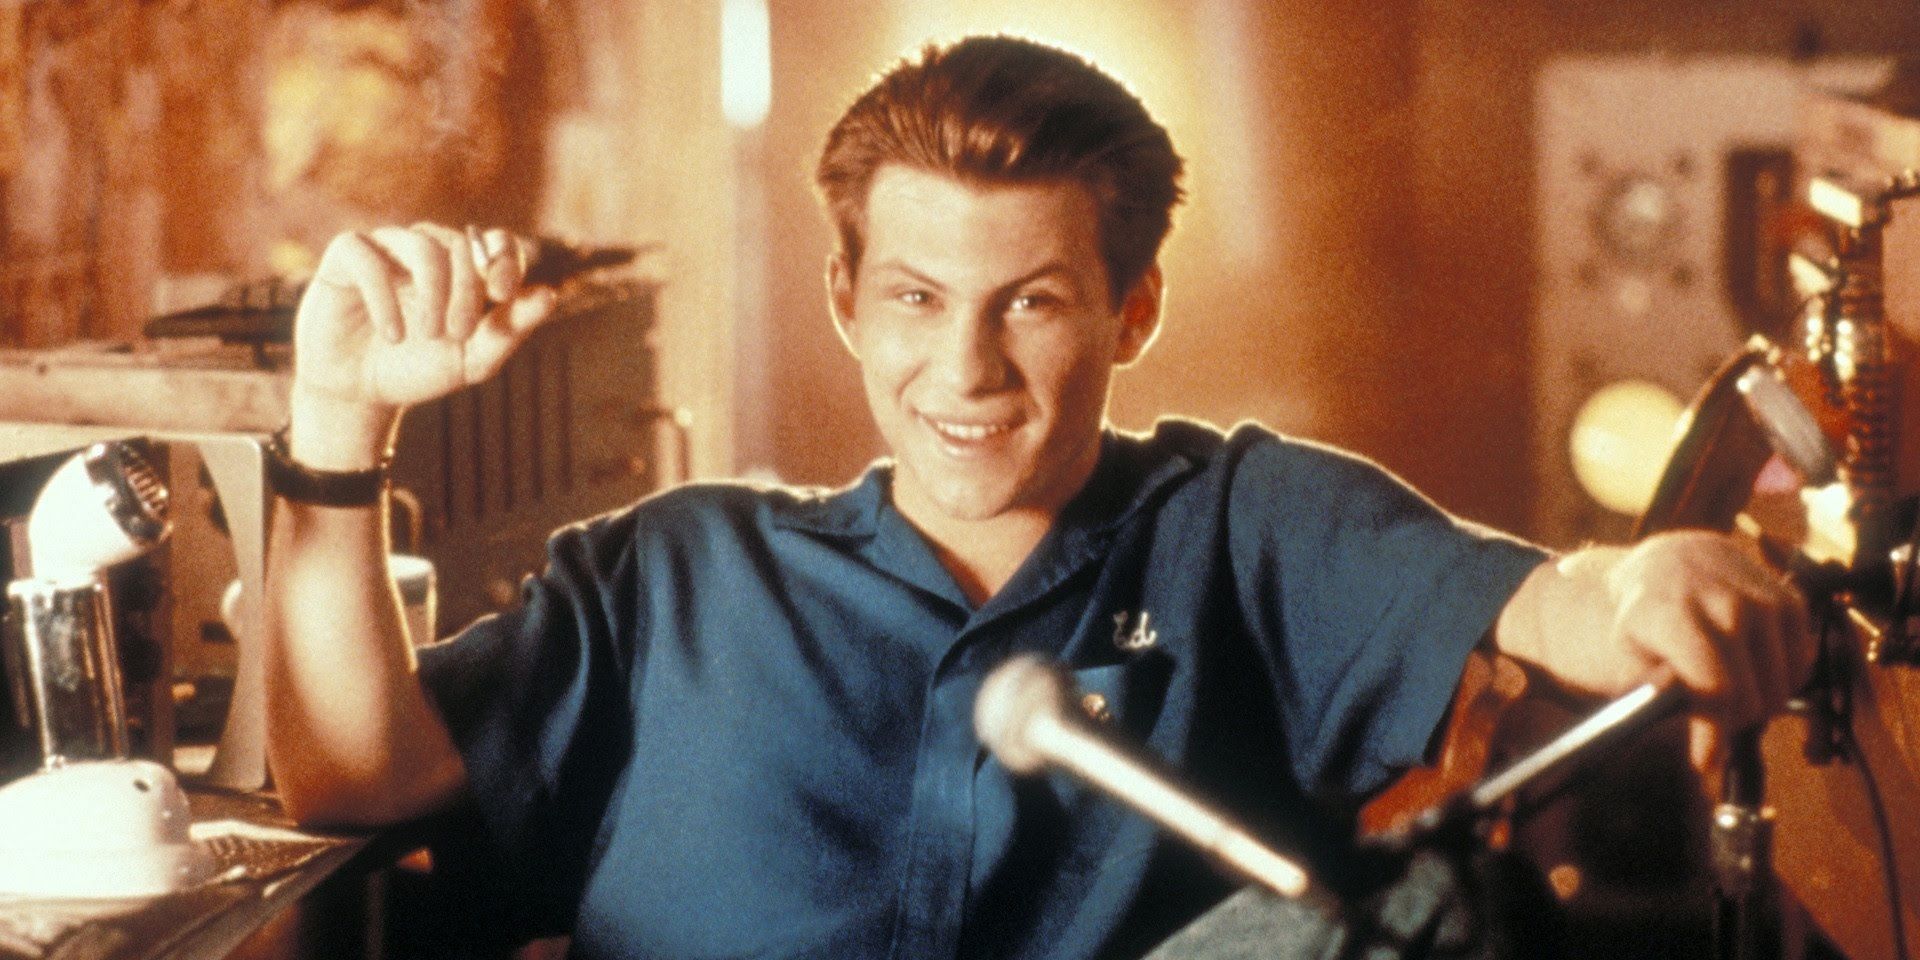 Christian Slater in Pump Up the Volume - Student/Principal Rivalries